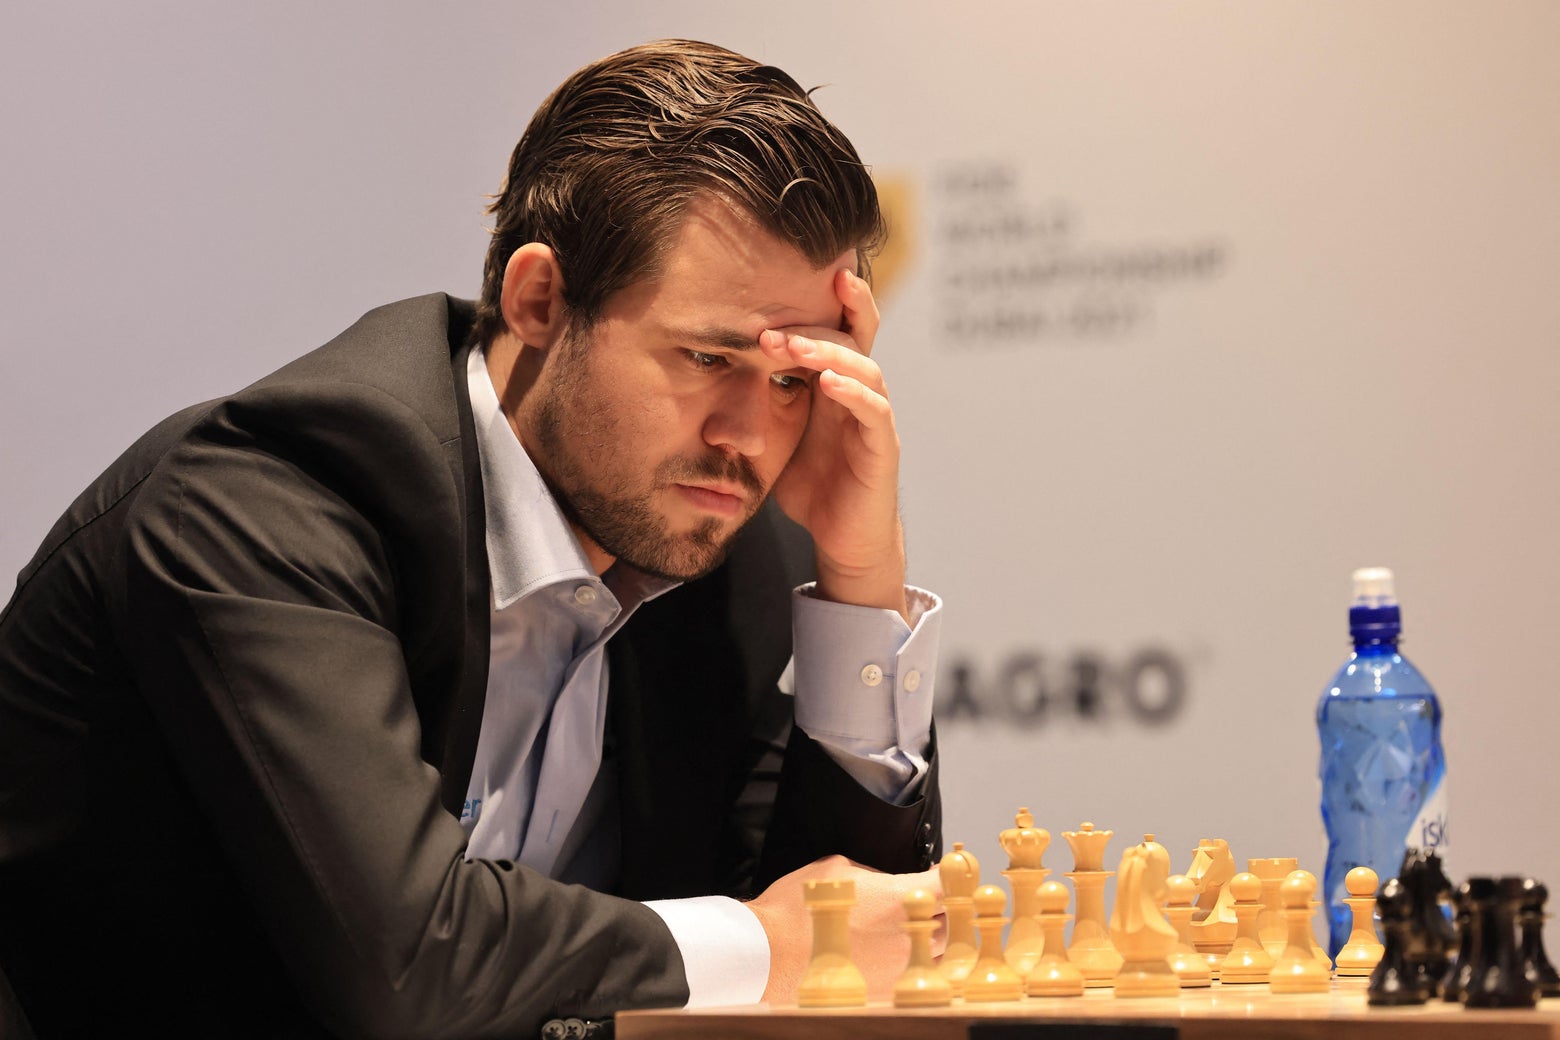 World Chess Championship Match 2021: What You Should Know Before It Starts  - TheChessWorld